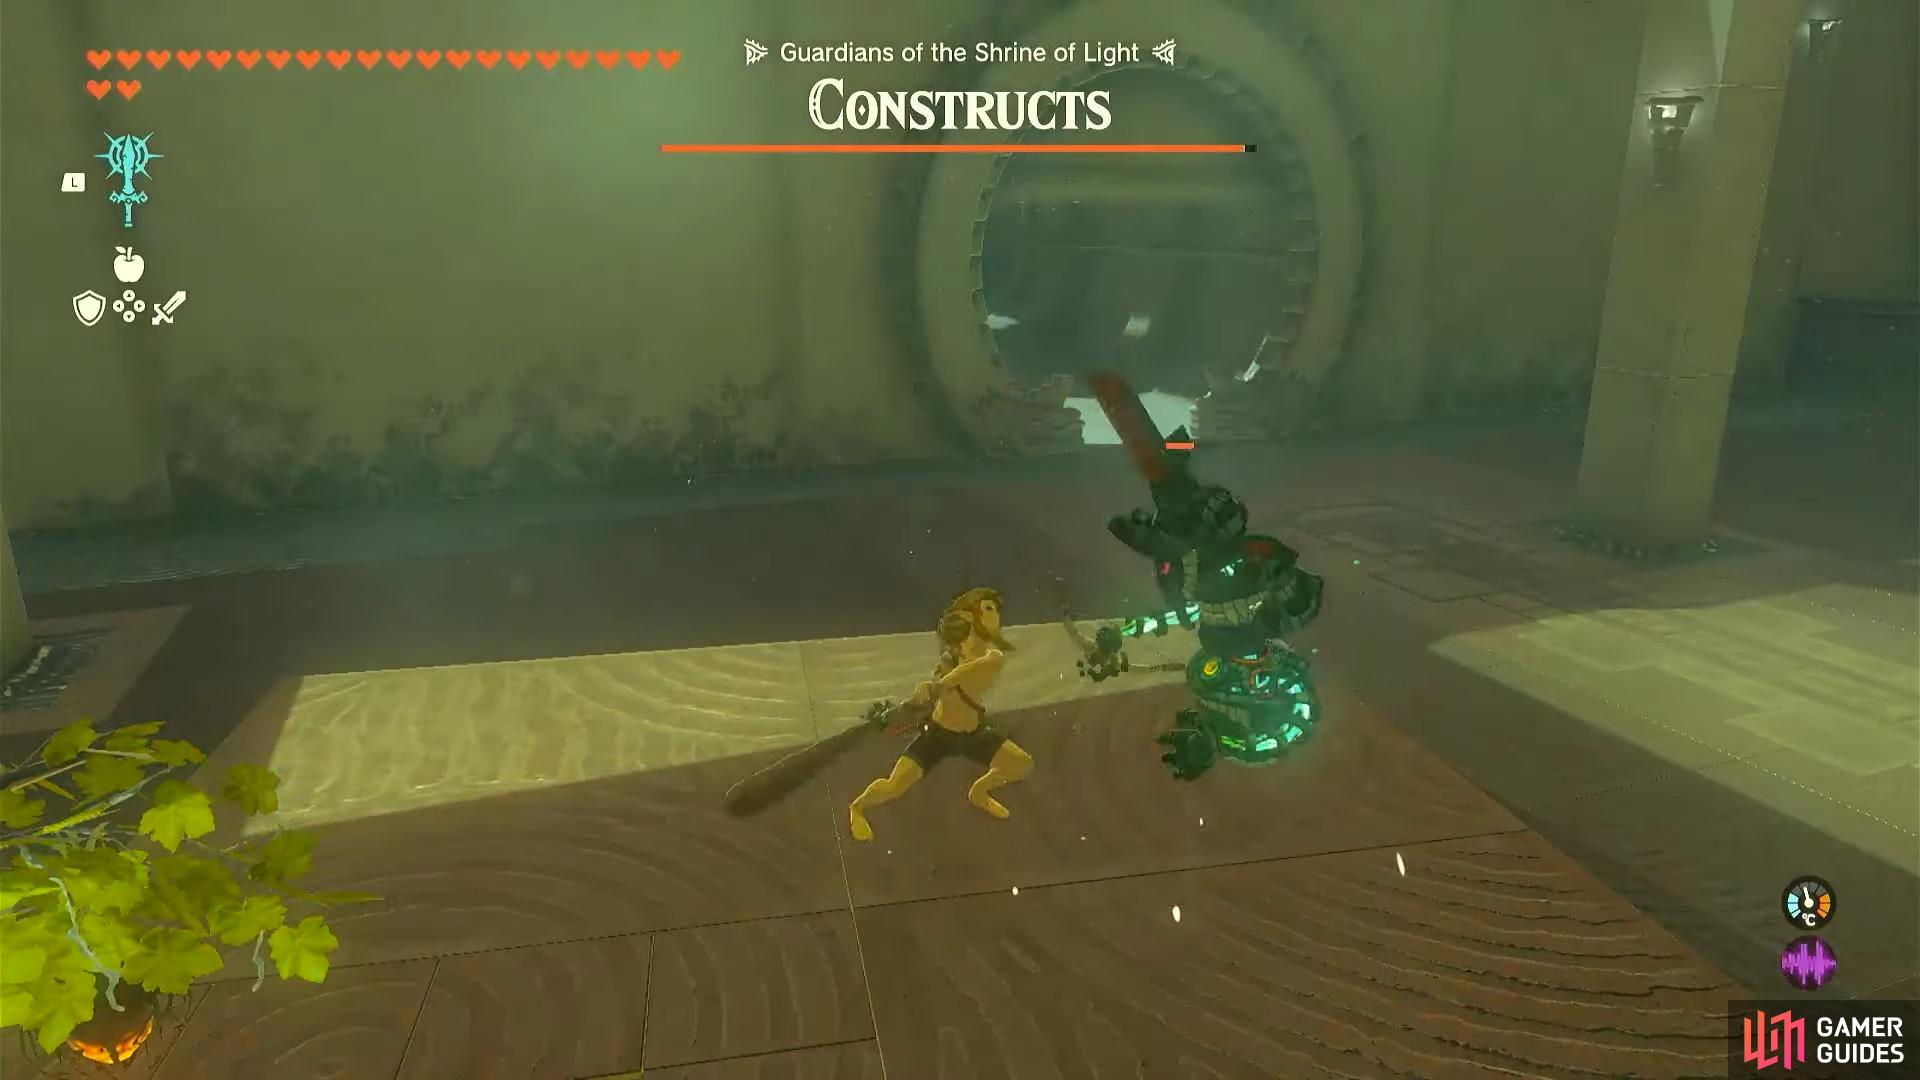 Taking on the first Construct of the shrine